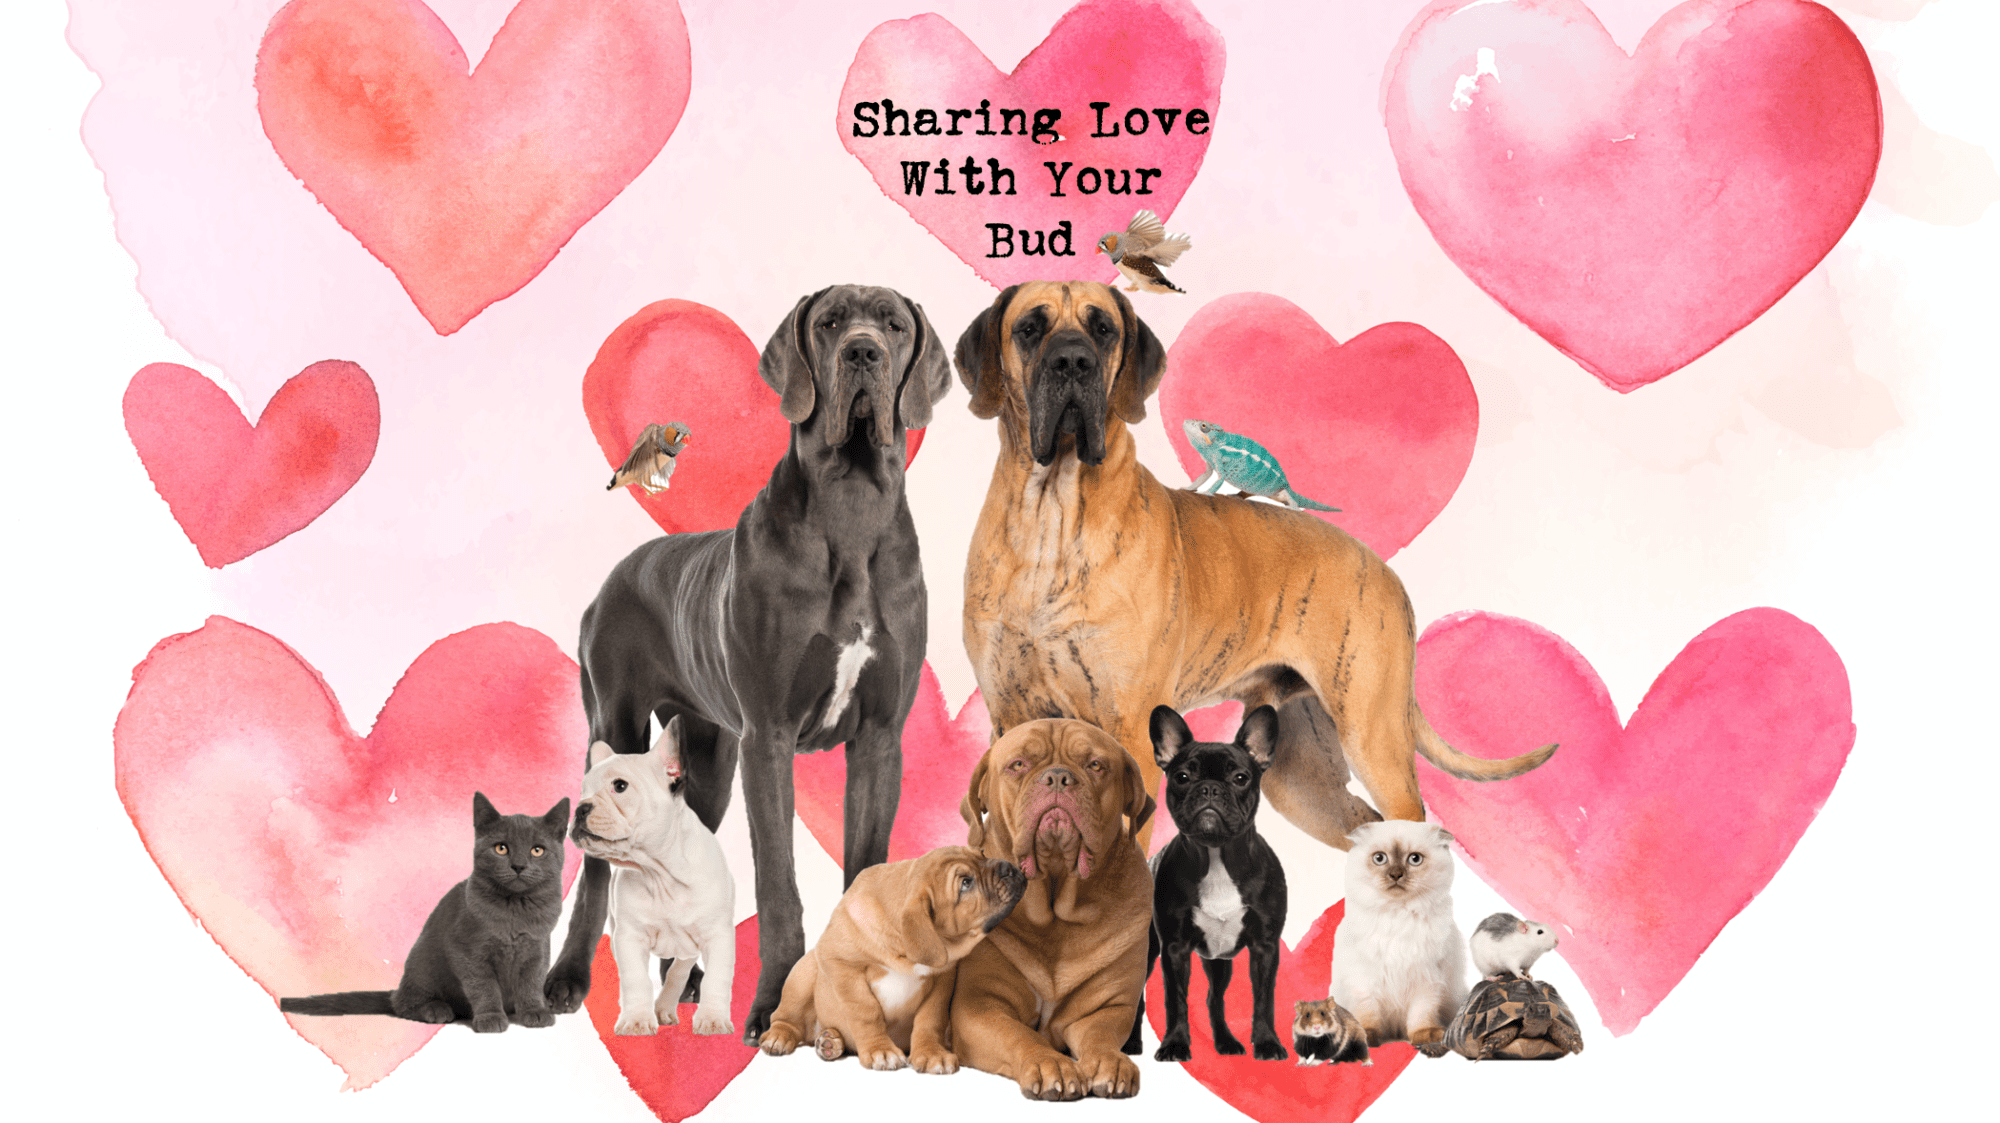 valentines day love sharing affection dog cat pets love sweet cute gifts